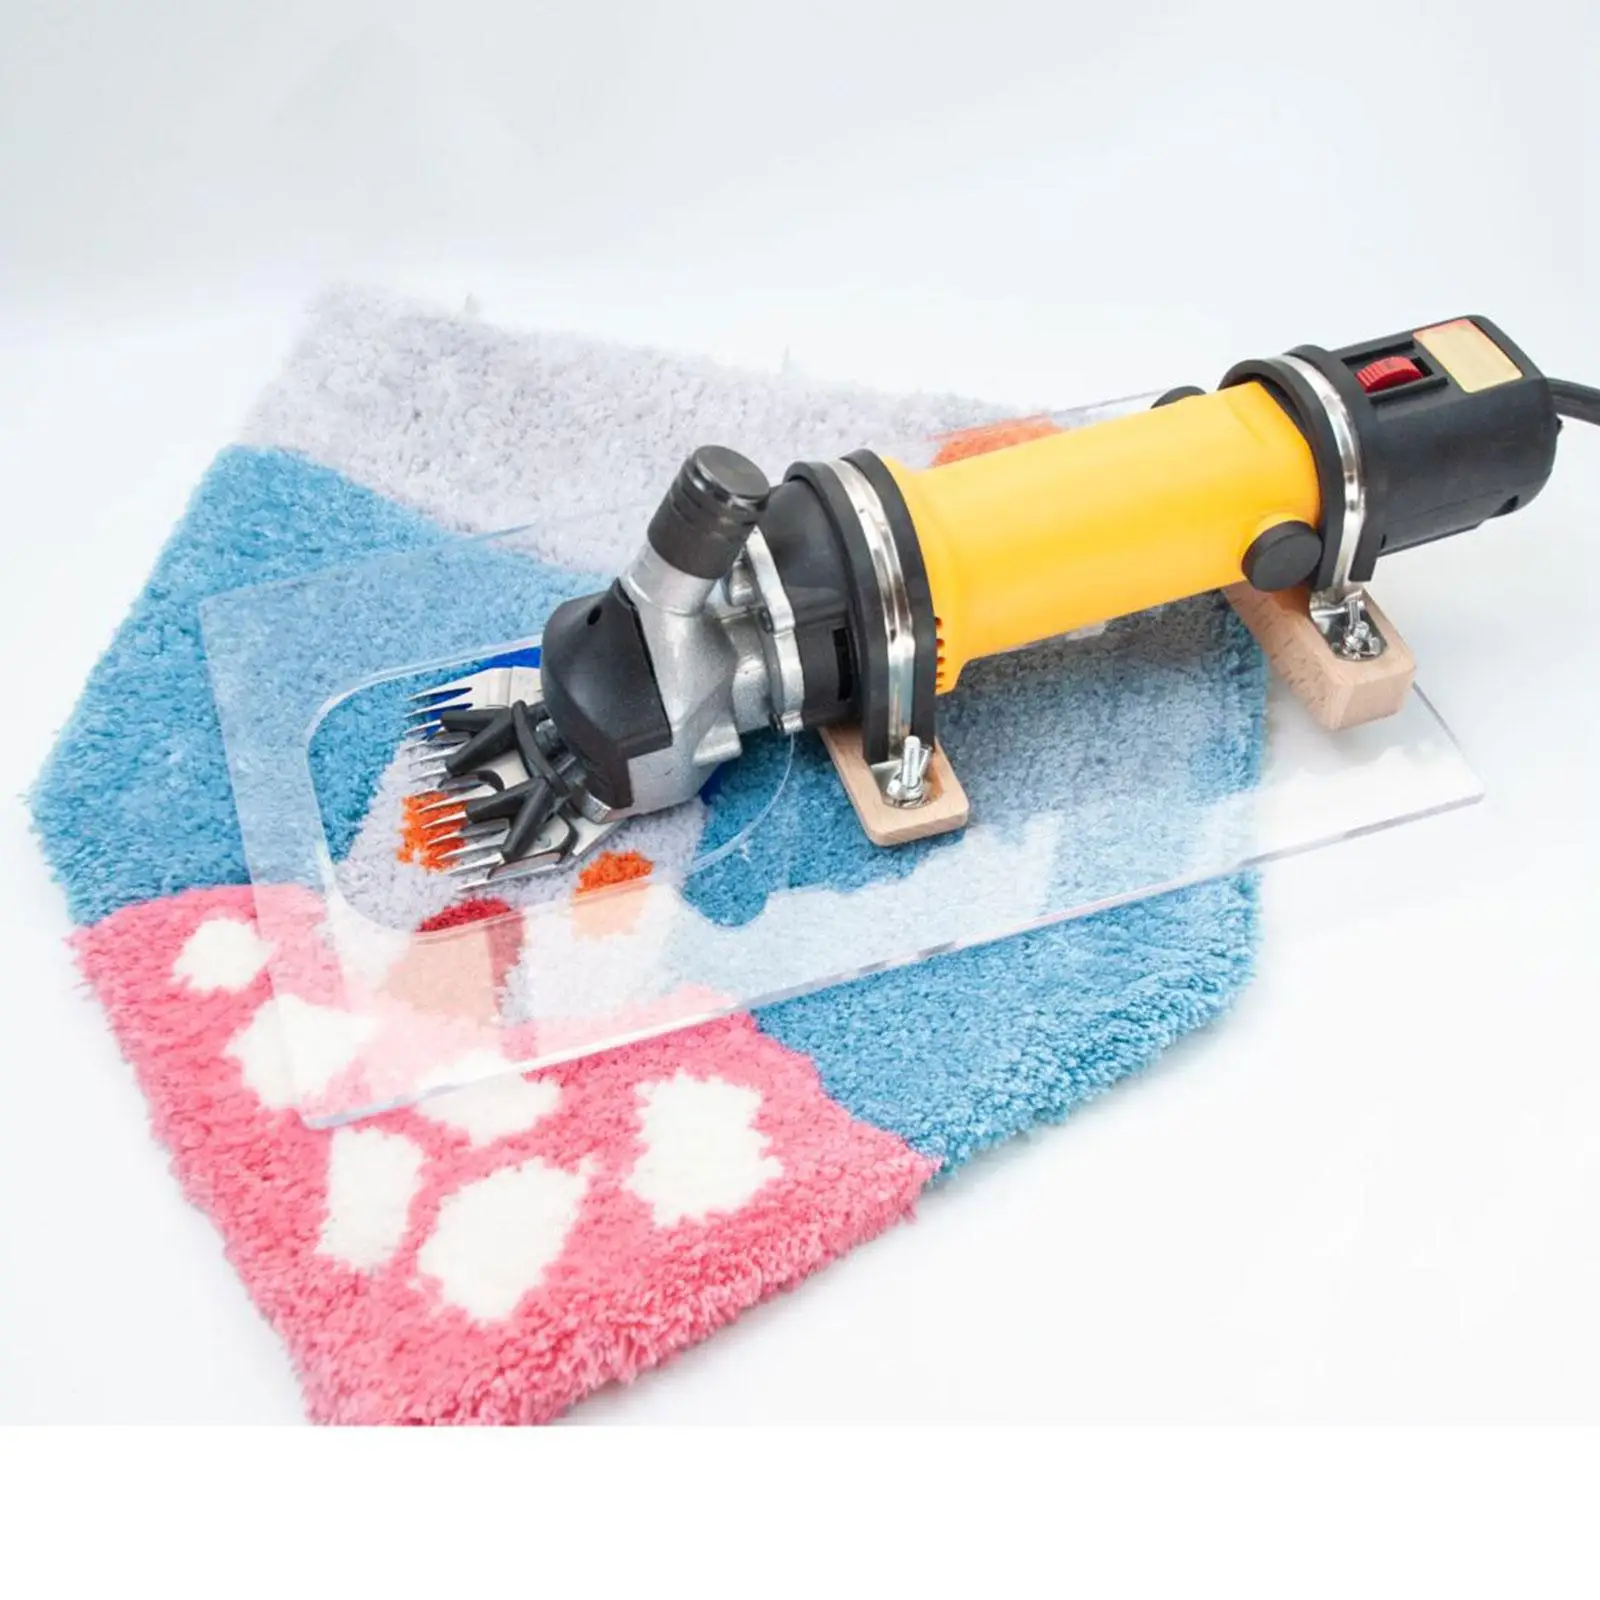 Carpet Clipper Base Simple Installation Household Cut Clippers Carpet Trimmer Shearing Fur Machine Holder for Tufting Tools